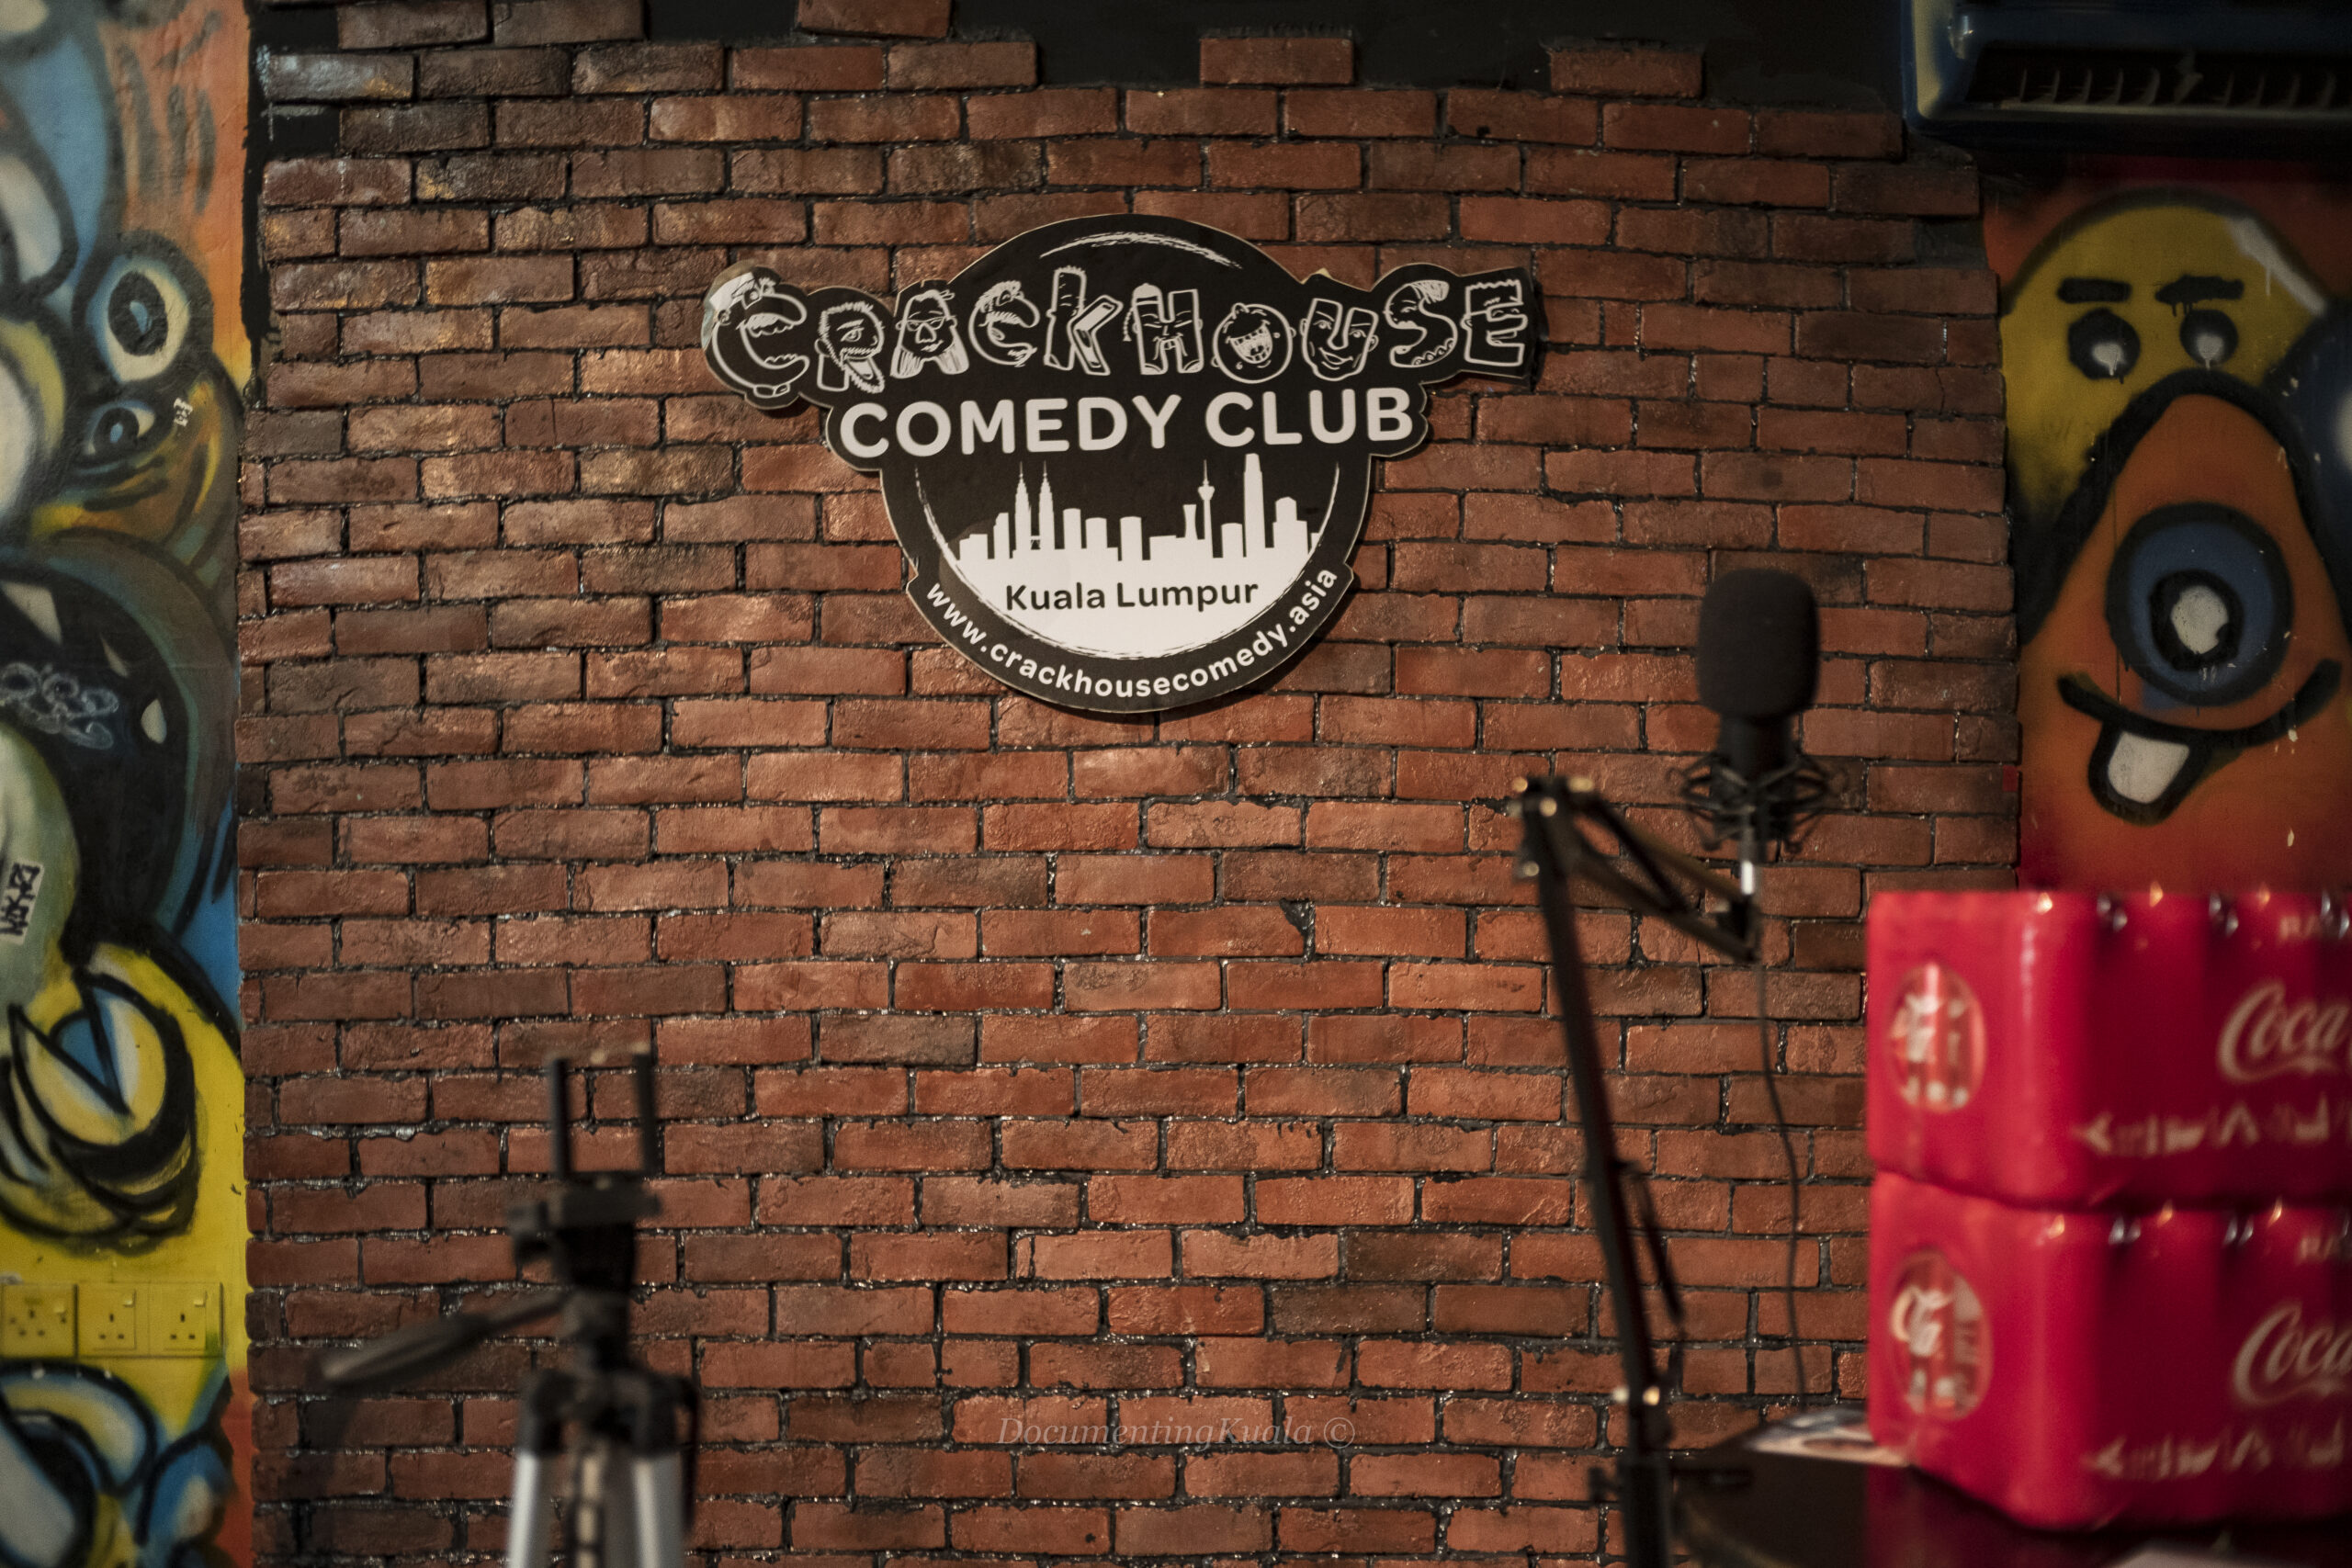 The co-founder of Crackhouse Comedy Club TTDI was detained yesterday. Image credit: Crackhouse Comedy Club